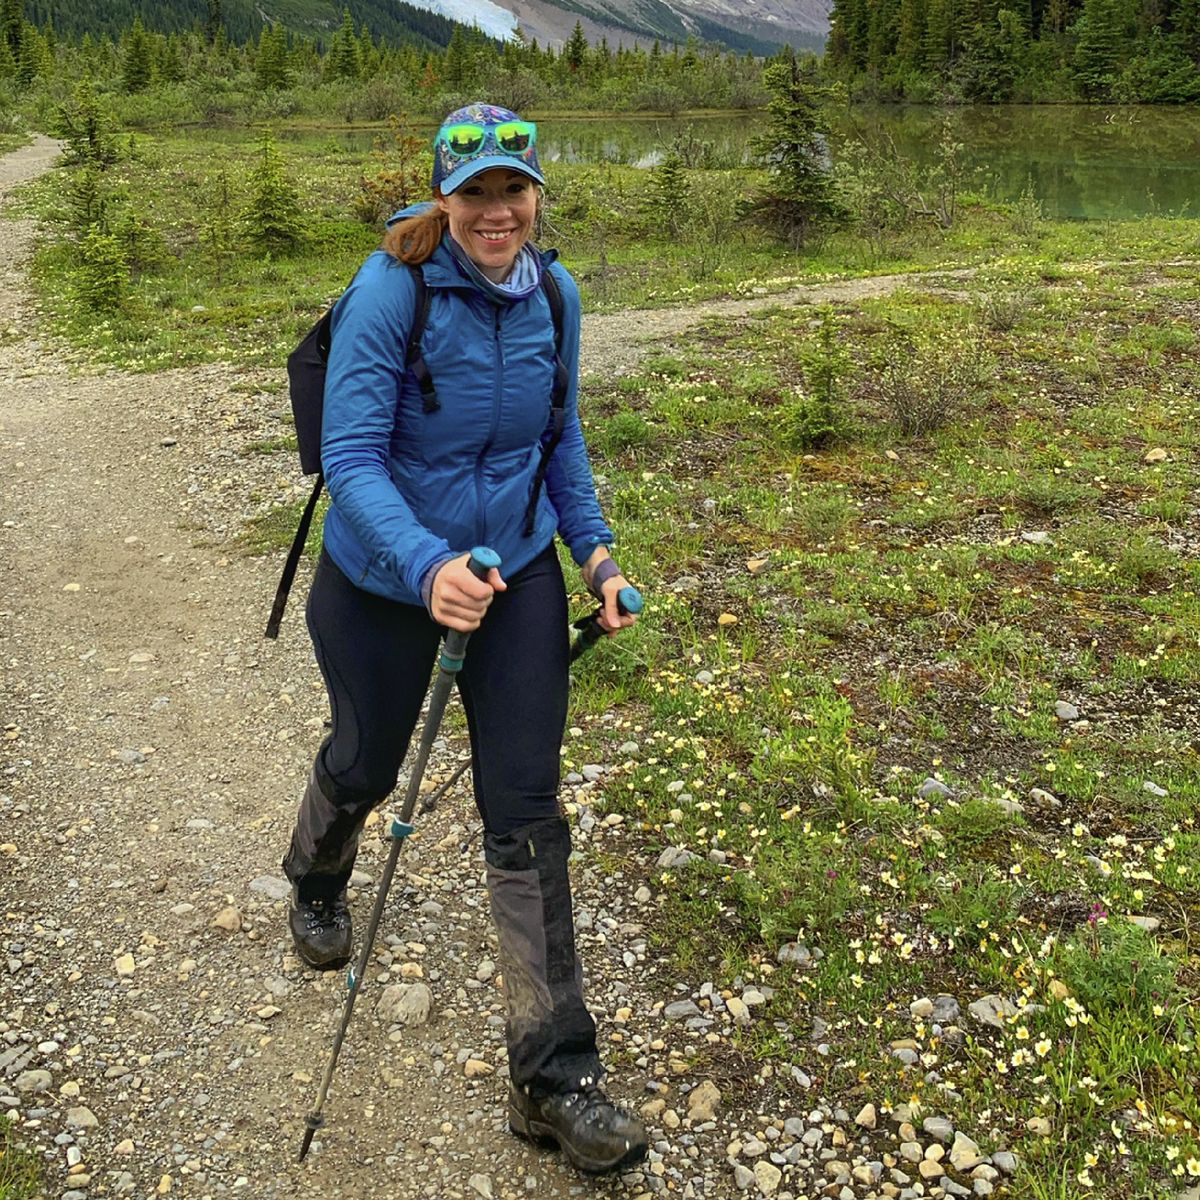 FarOut scout Brigid Scott smiling while hiking.